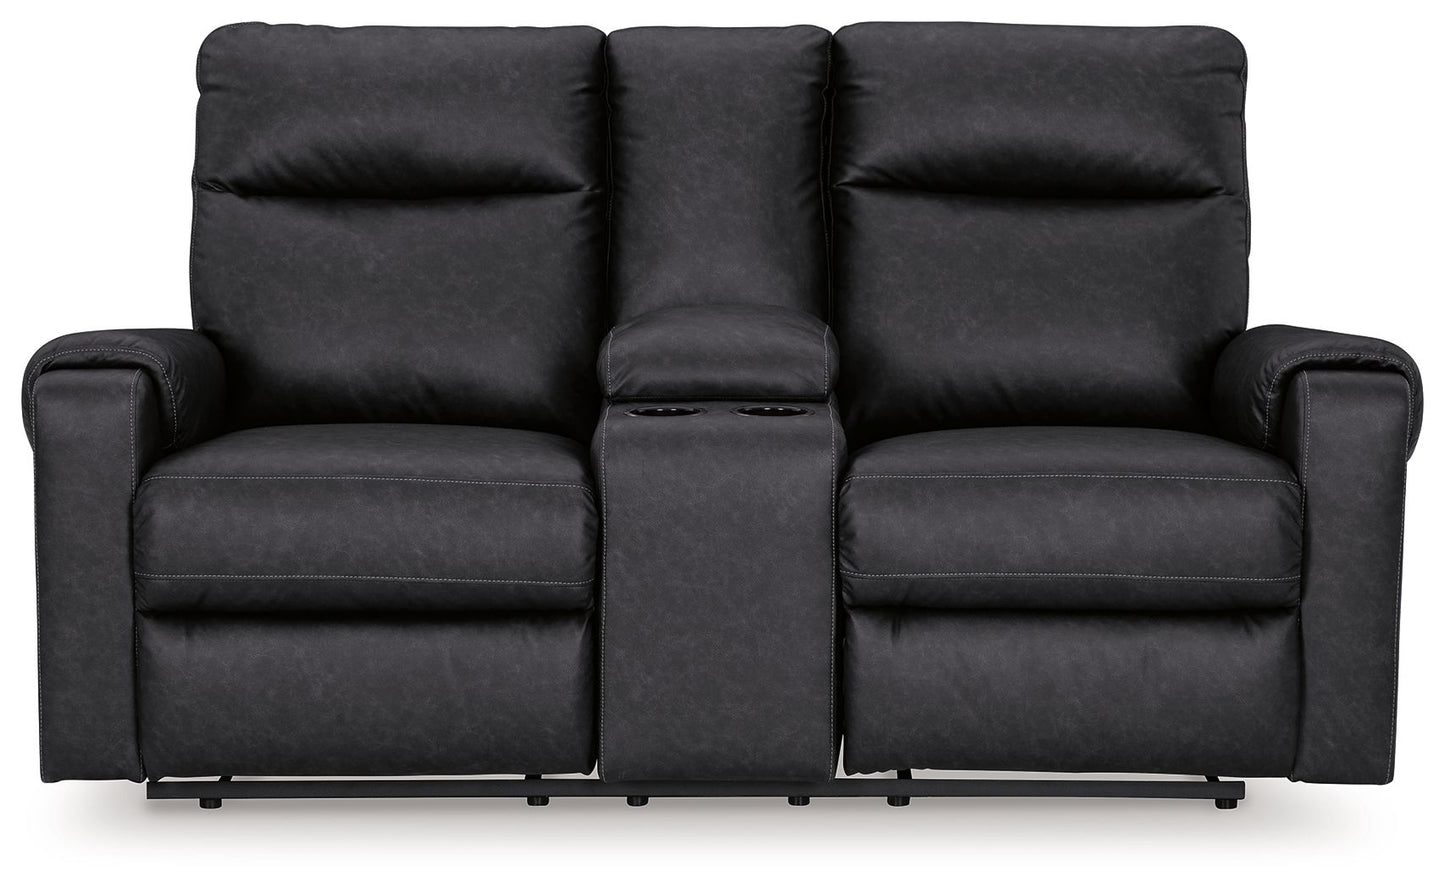 Axtellton - Carbon - Dbl Power Reclining Loveseat With Console - Faux Leather